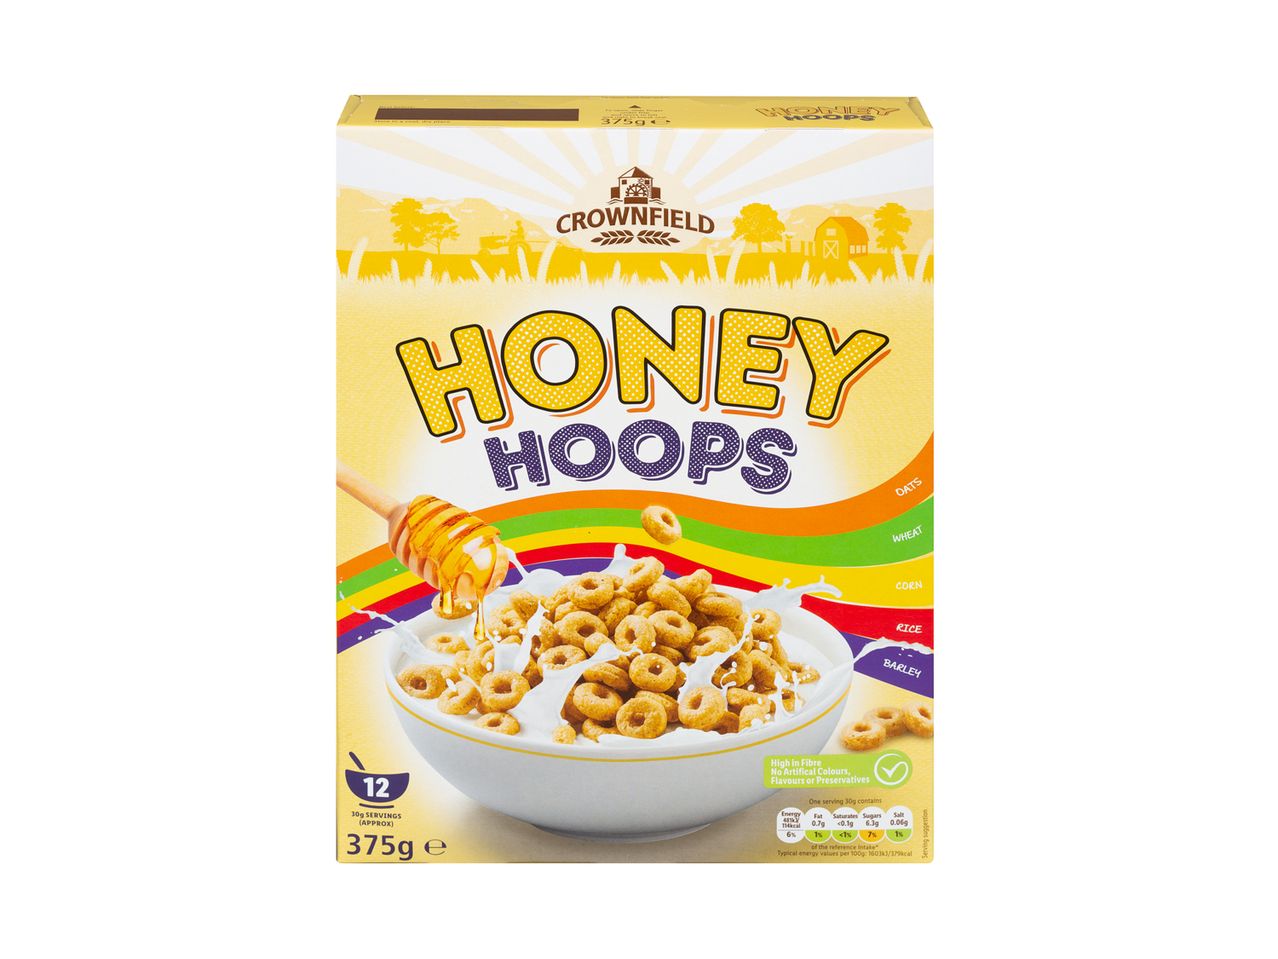 Go to full screen view: Crownfield Honey Hoops - Image 1